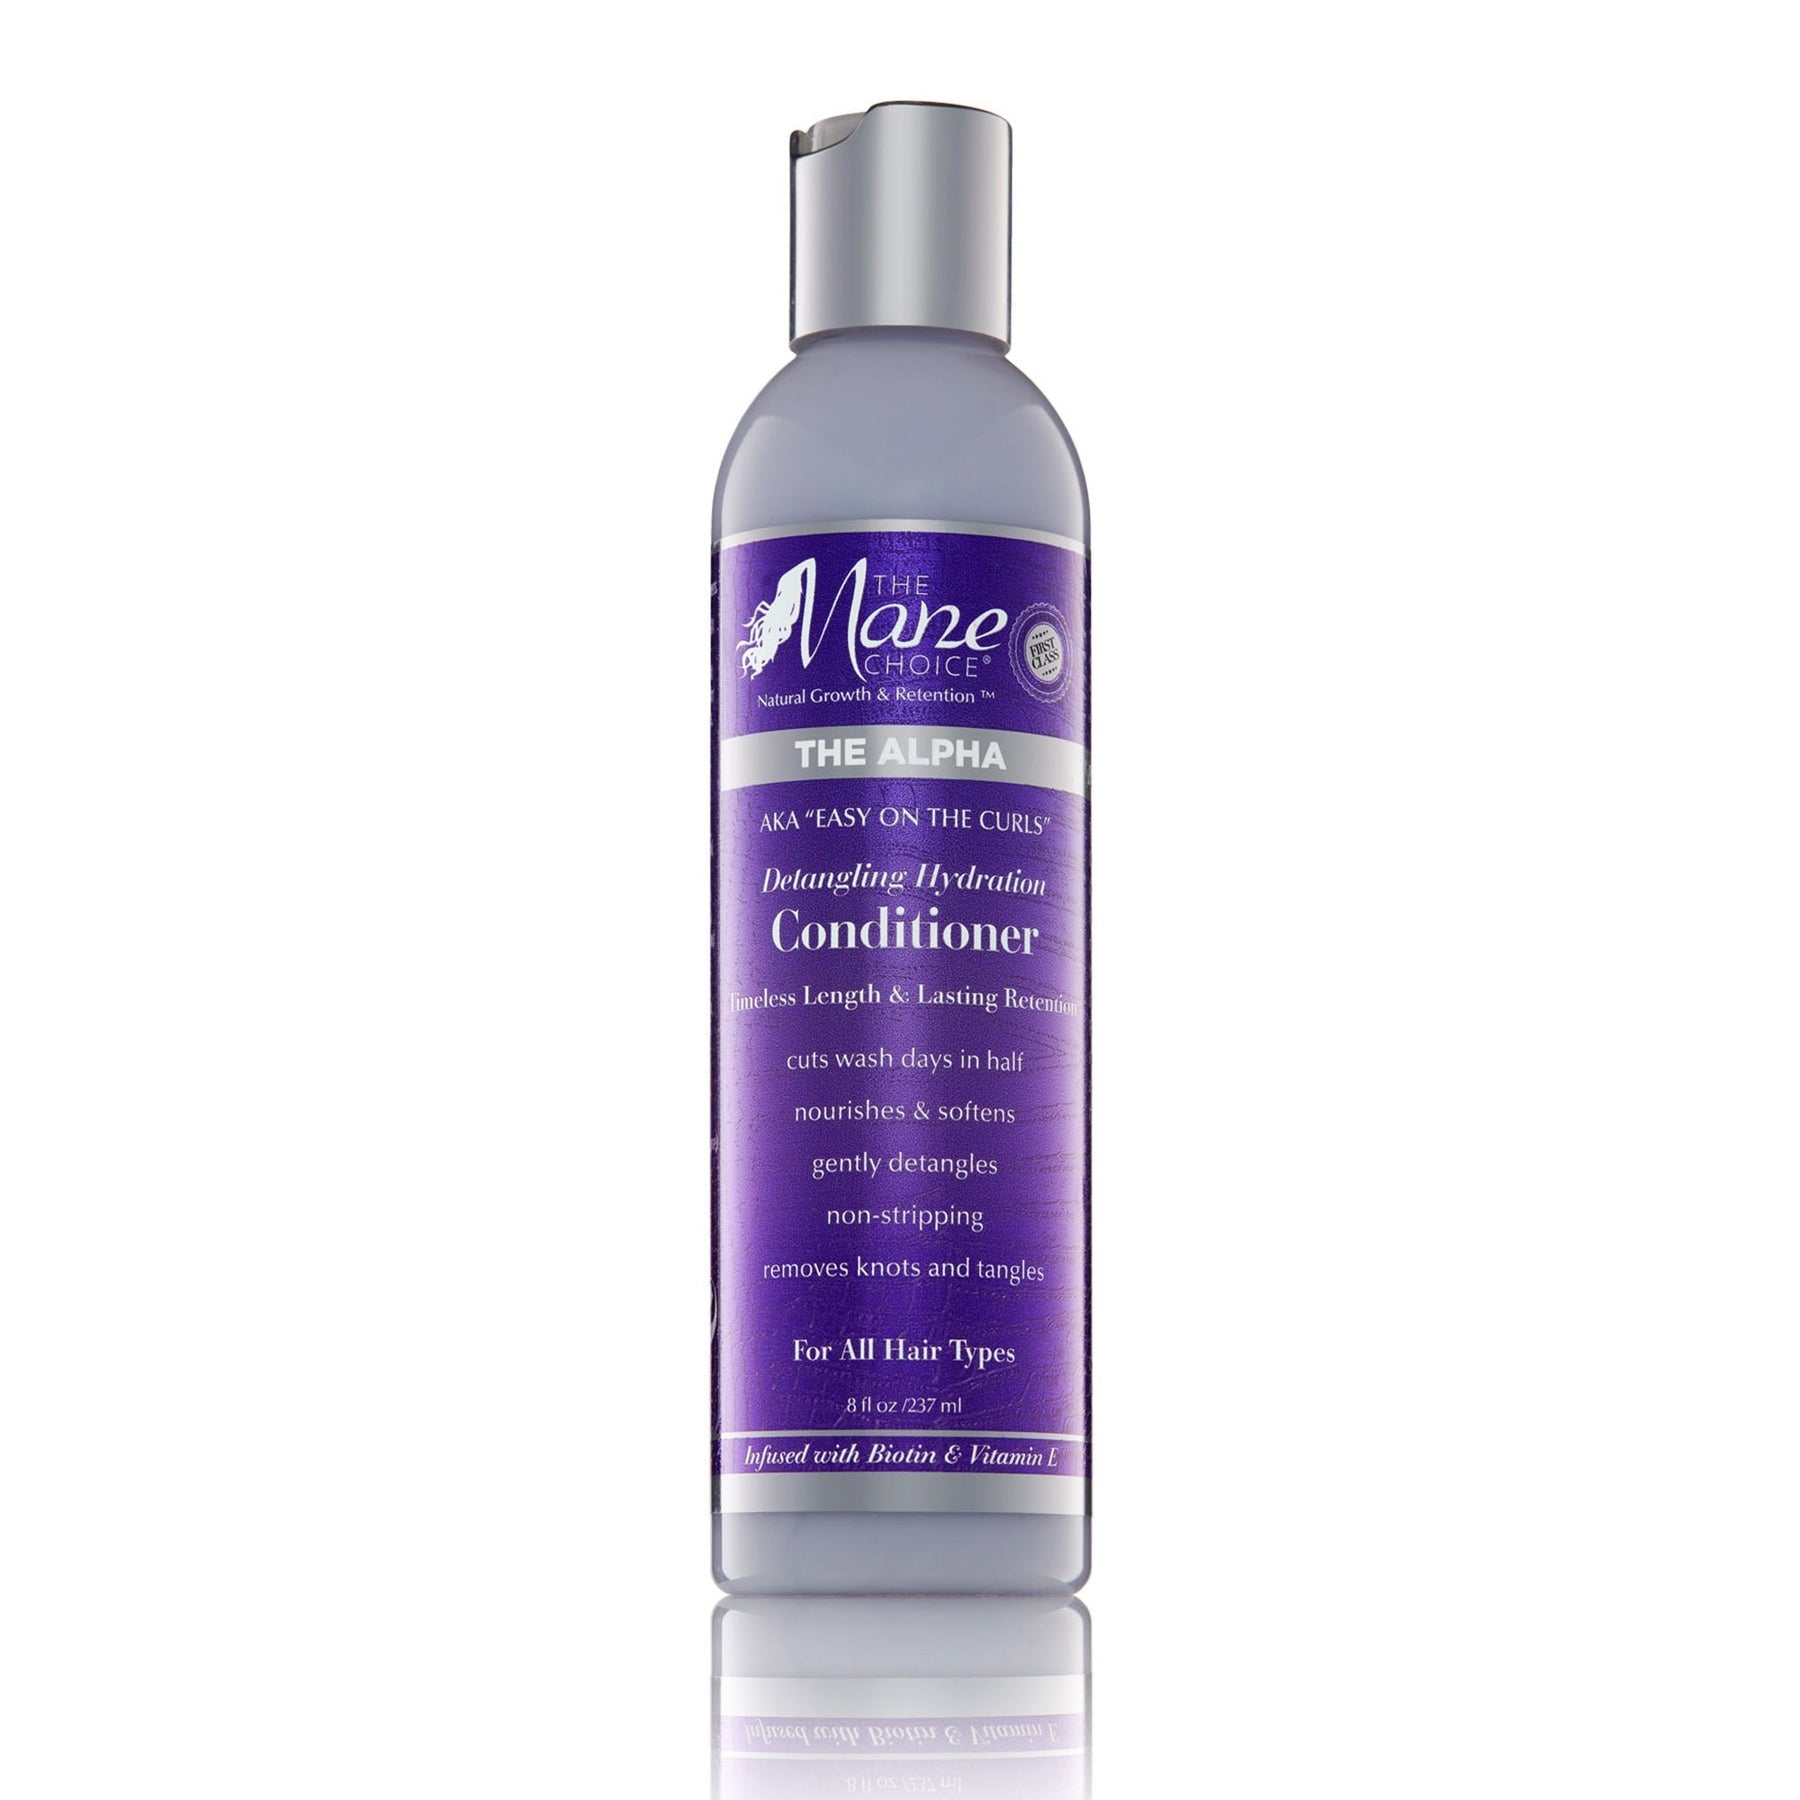 The Mane Choice The Alpha Easy On The Curls Detangling Hydration Conditioner 8 oz